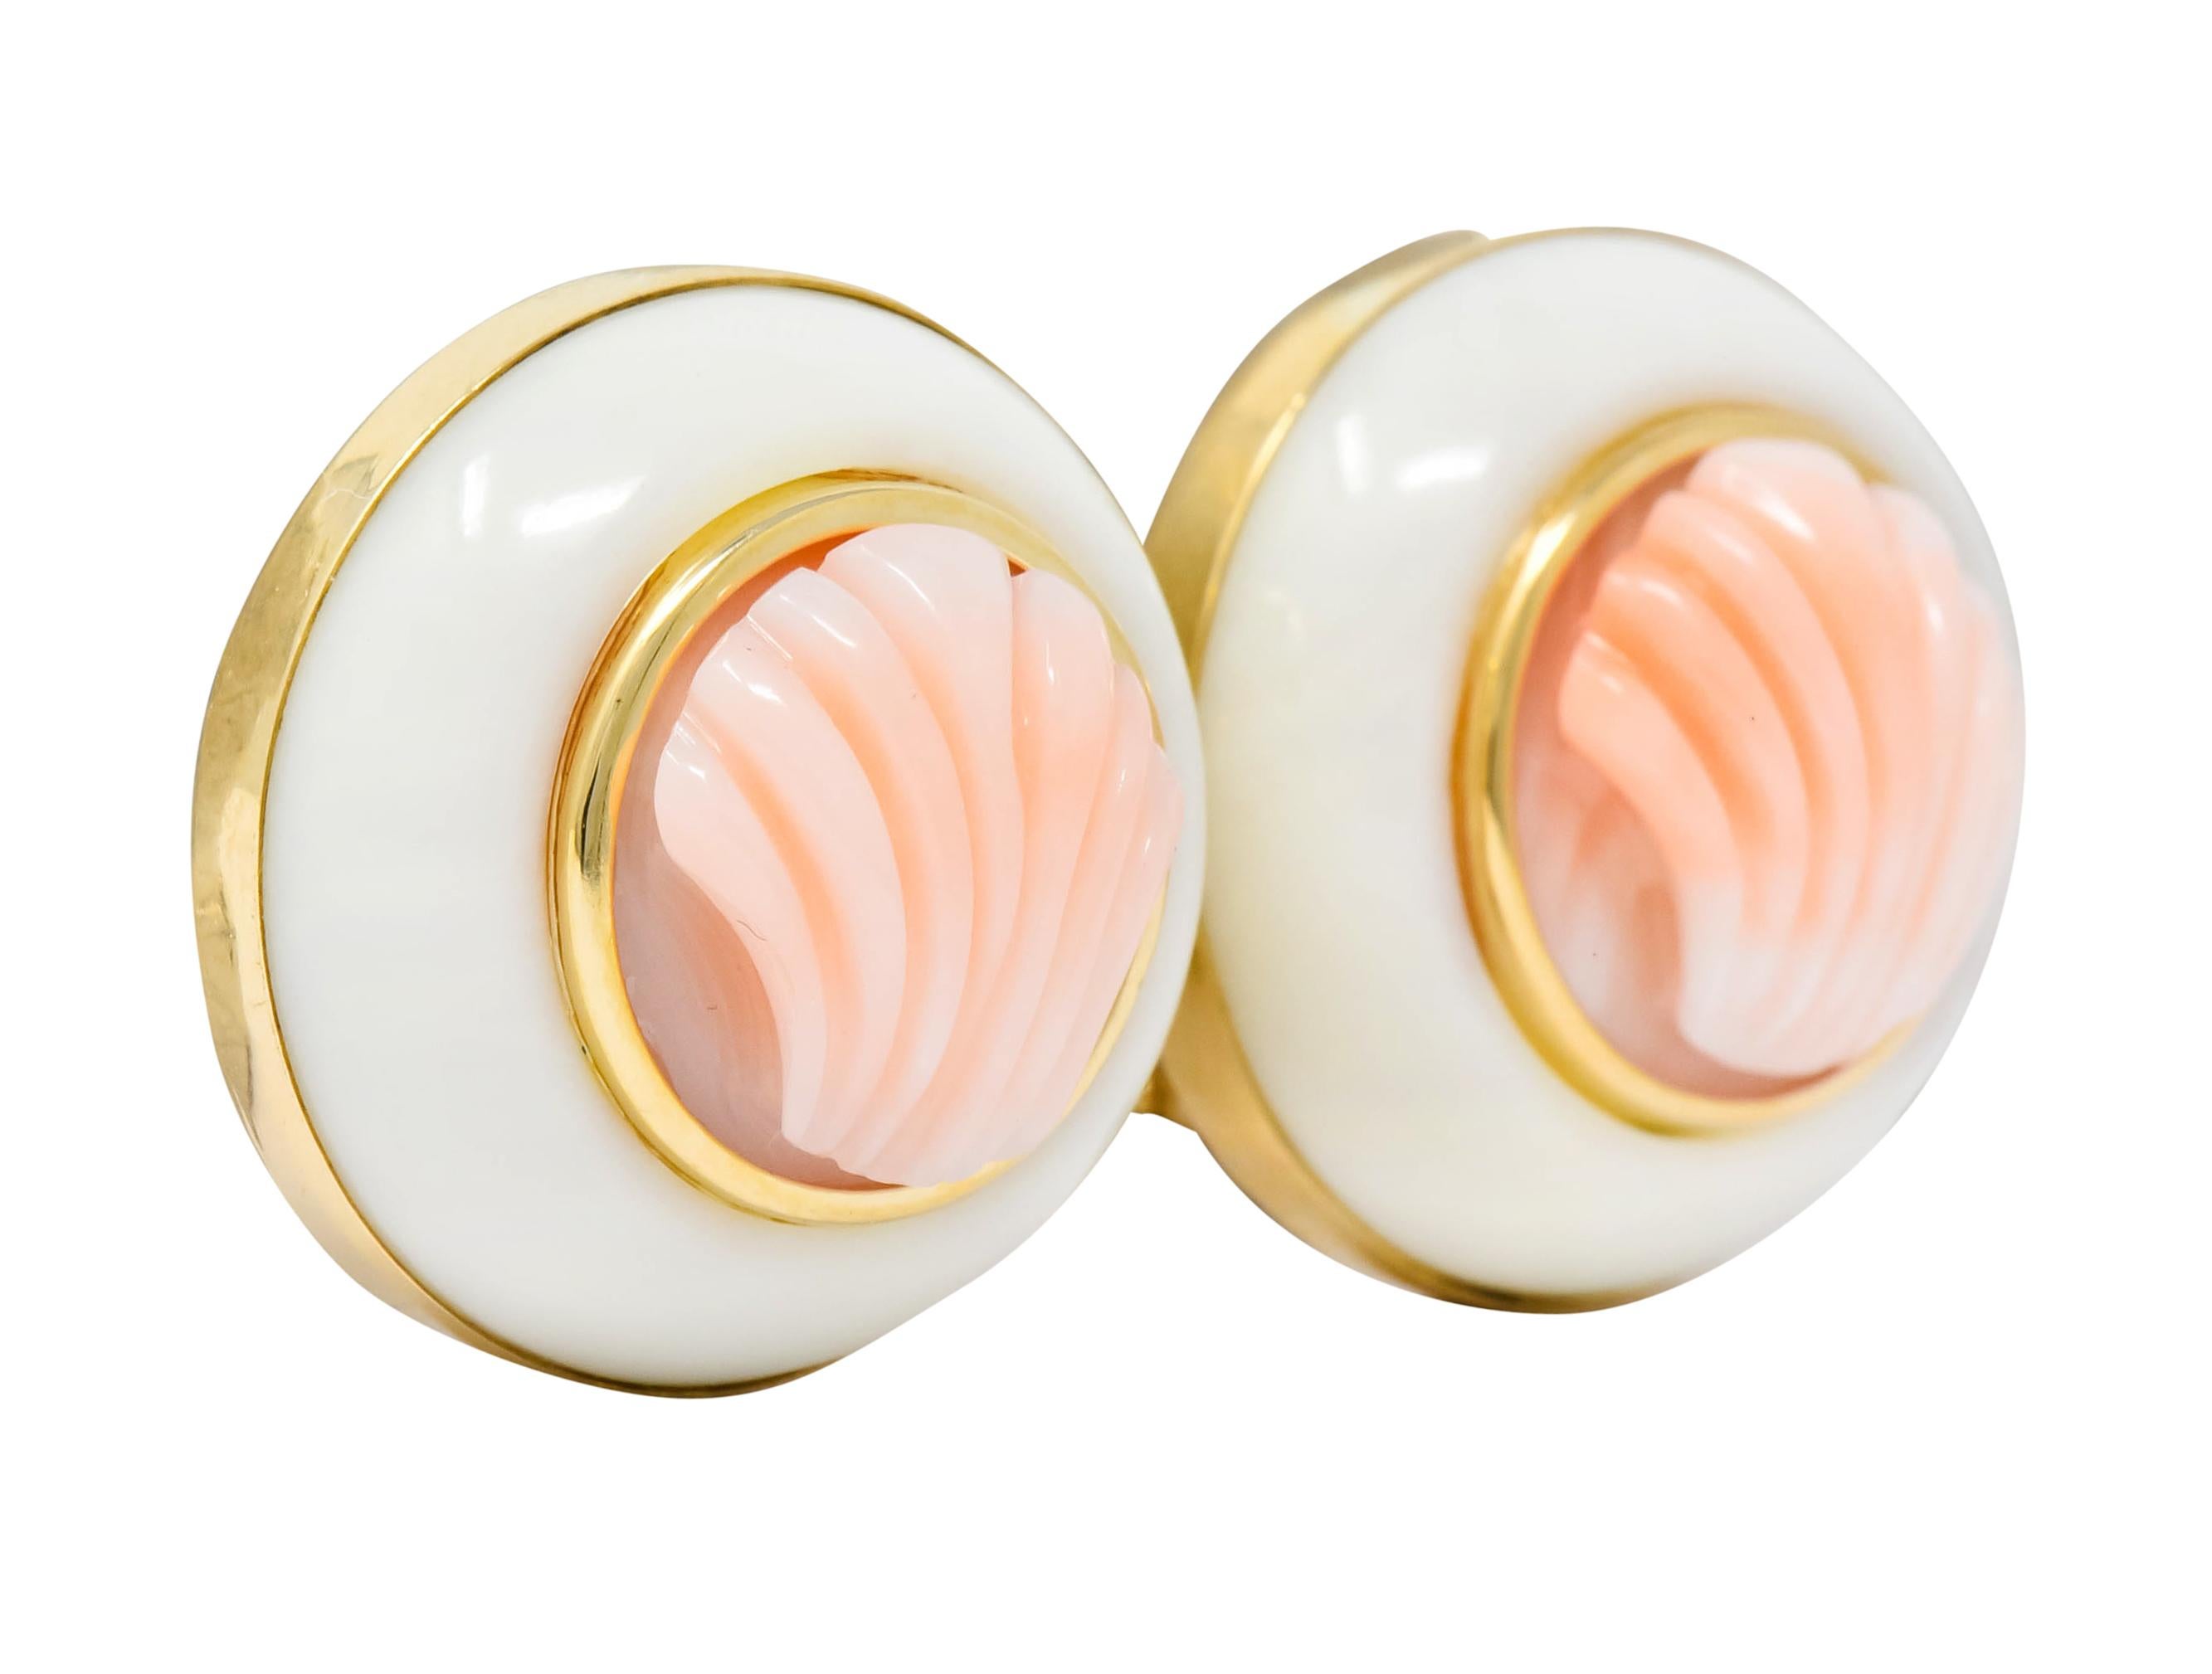 Each earring centers deeply carved coral, very light peachy-pink, depicting a fanned shell motif

With a second circular ring of coral cabochon, opaque and creamy white in color

Both bezel set in polished gold surrounds

Completed by posts and